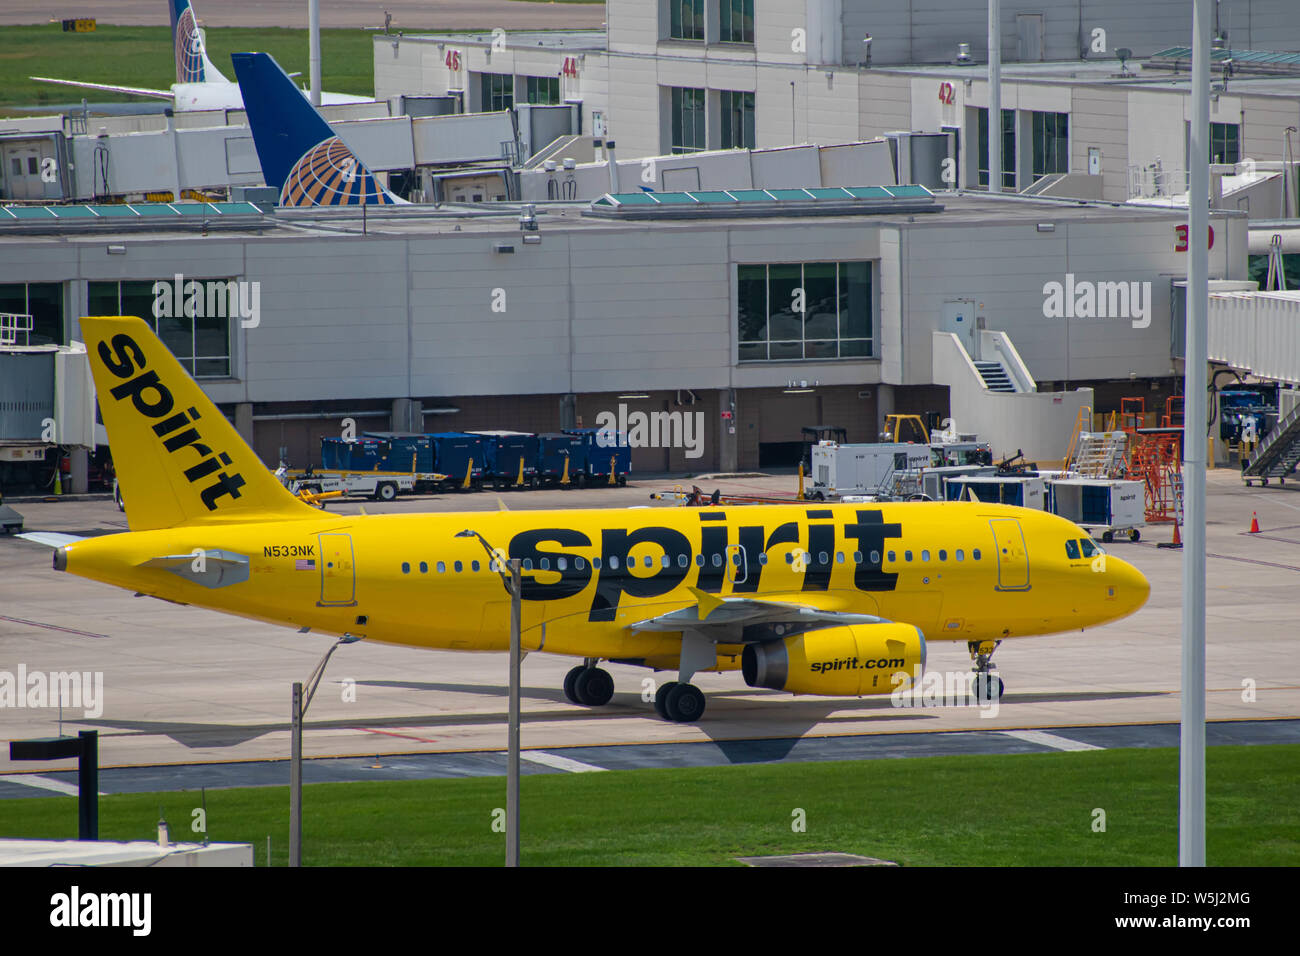 Orlando, Florida. July 09, 2019. Spirit Airlines aircraft on runway preparing for departure from the Orlando International Airport MCO Stock Photo